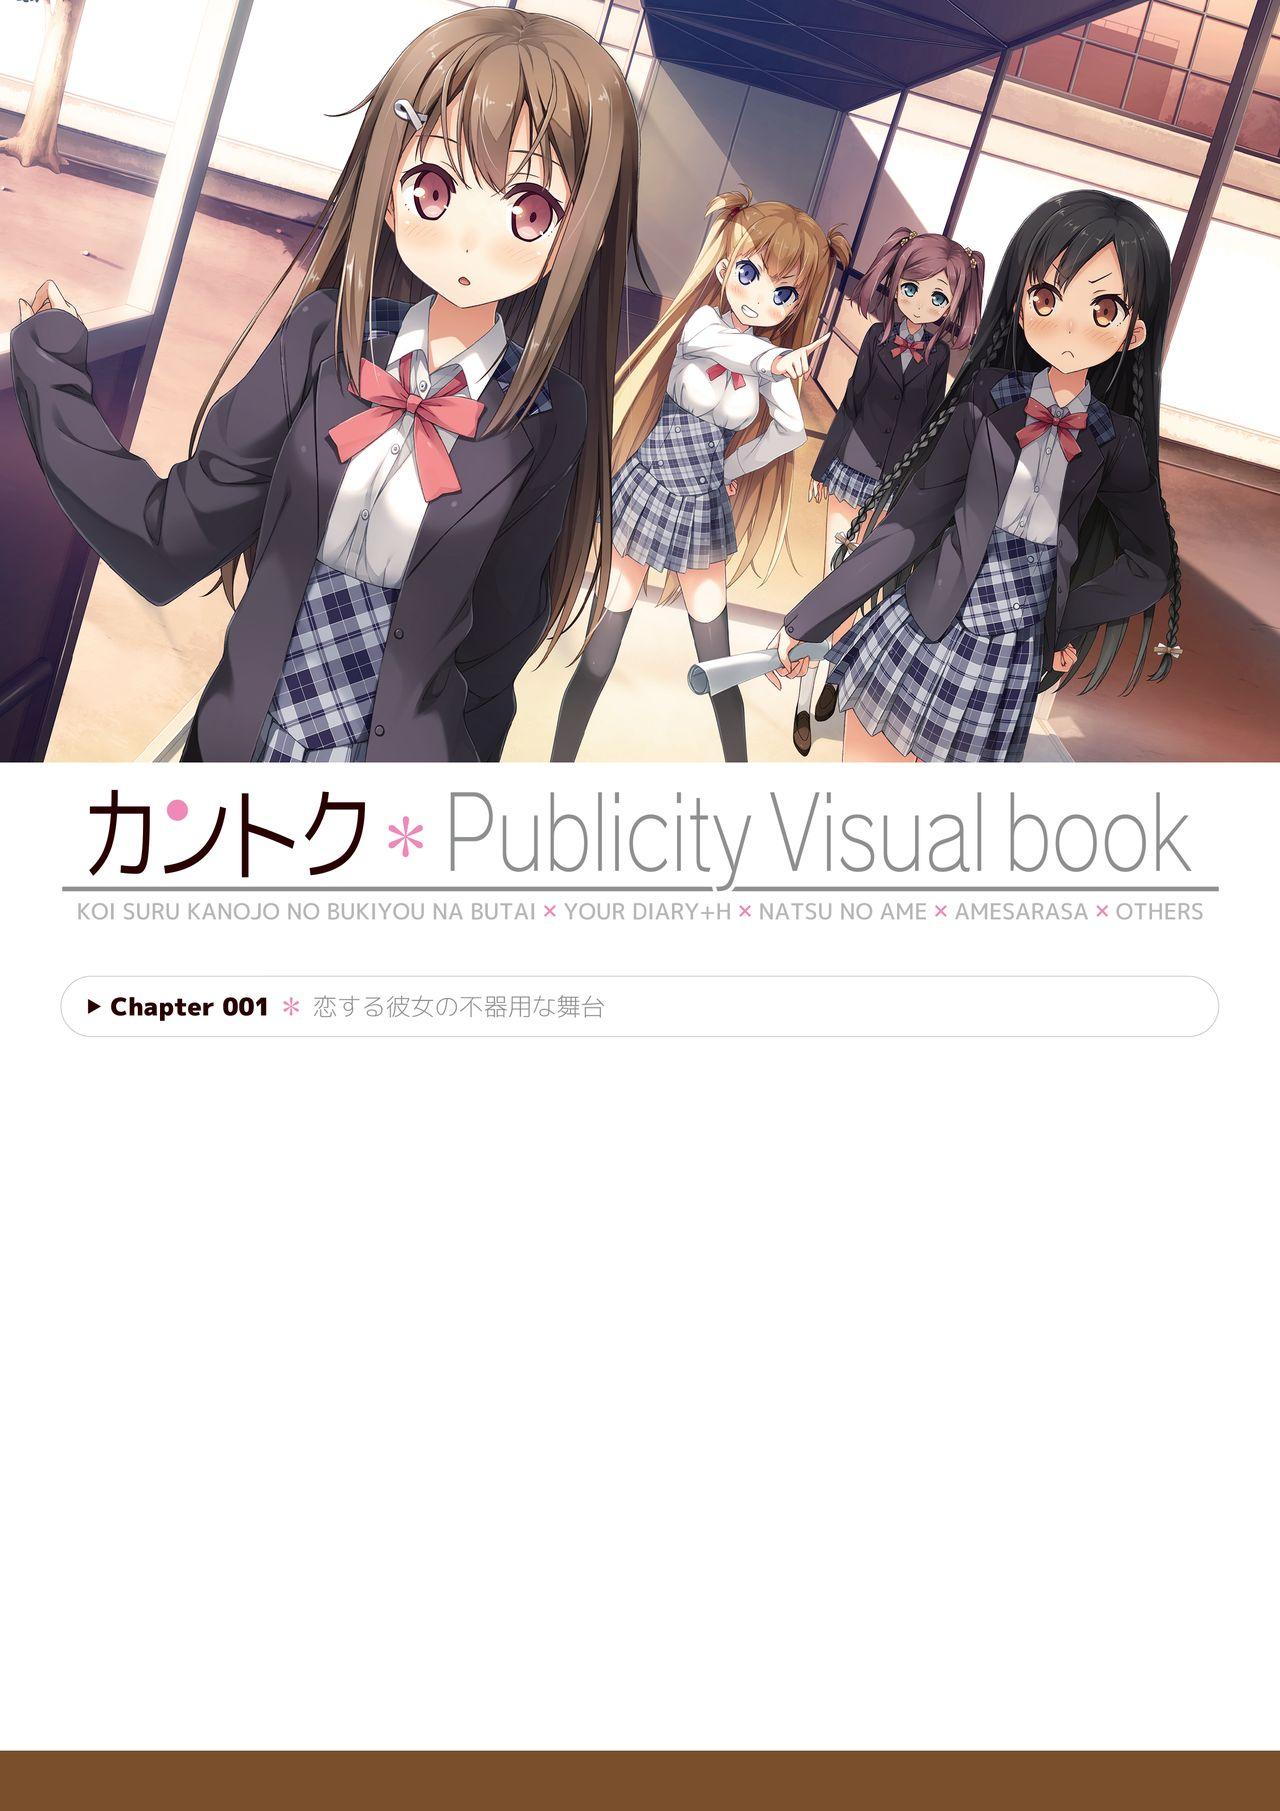 Glasses Kantoku Publicity Visual book - Amesarasa Your diary Real Amateur Porn - Page 6